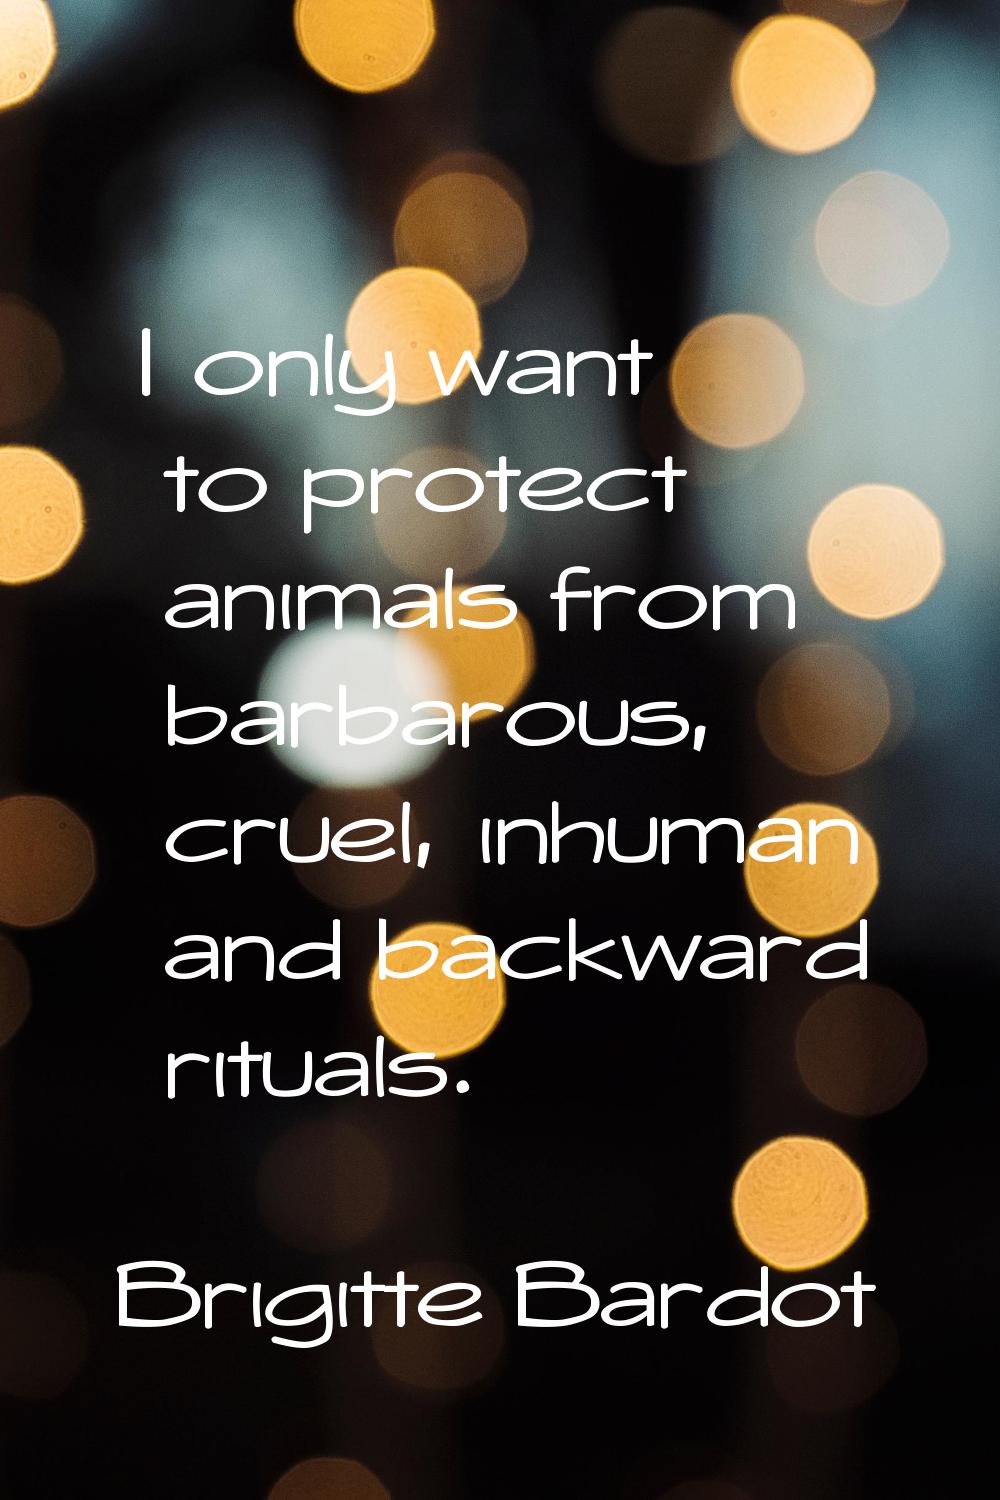 I only want to protect animals from barbarous, cruel, inhuman and backward rituals.